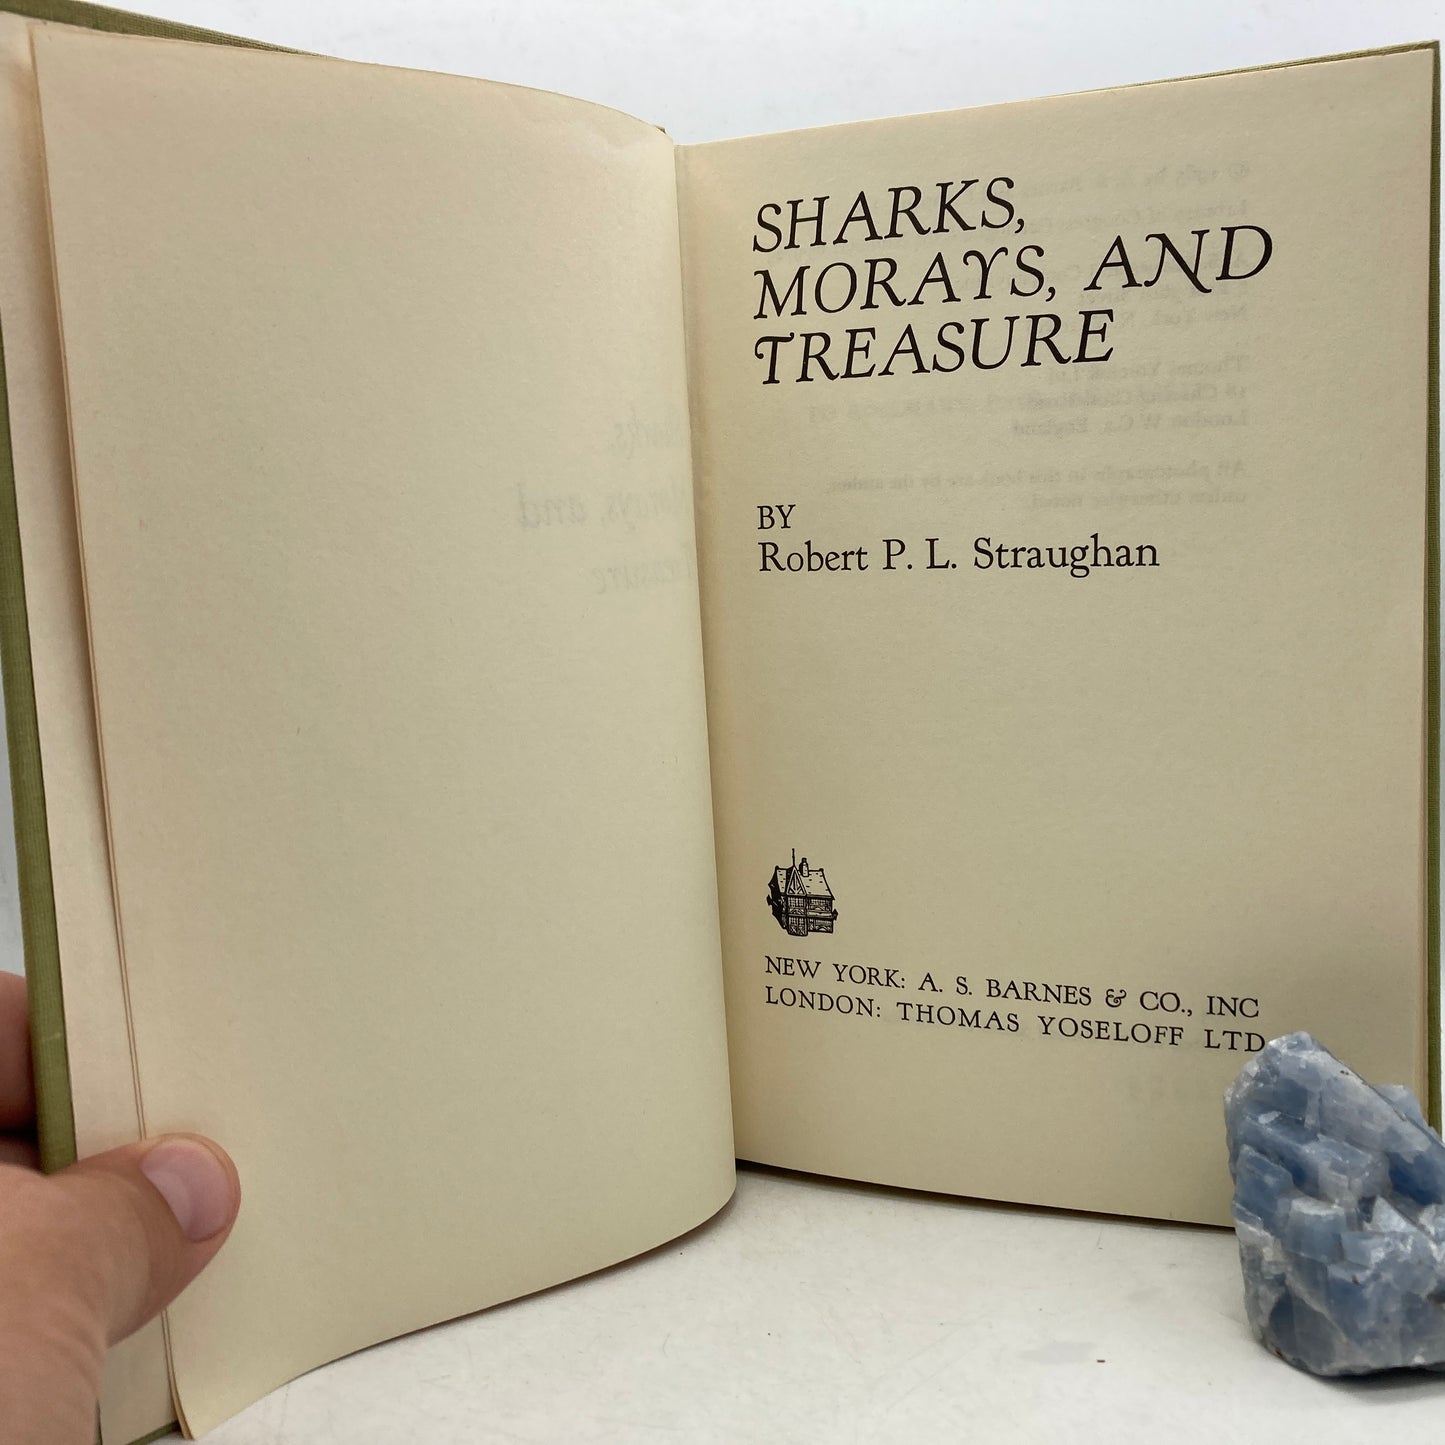 STRAUGHAN, Robert P.L. "Sharks, Morays, and Treasure" [A.S. Barnes & Co, 1965]